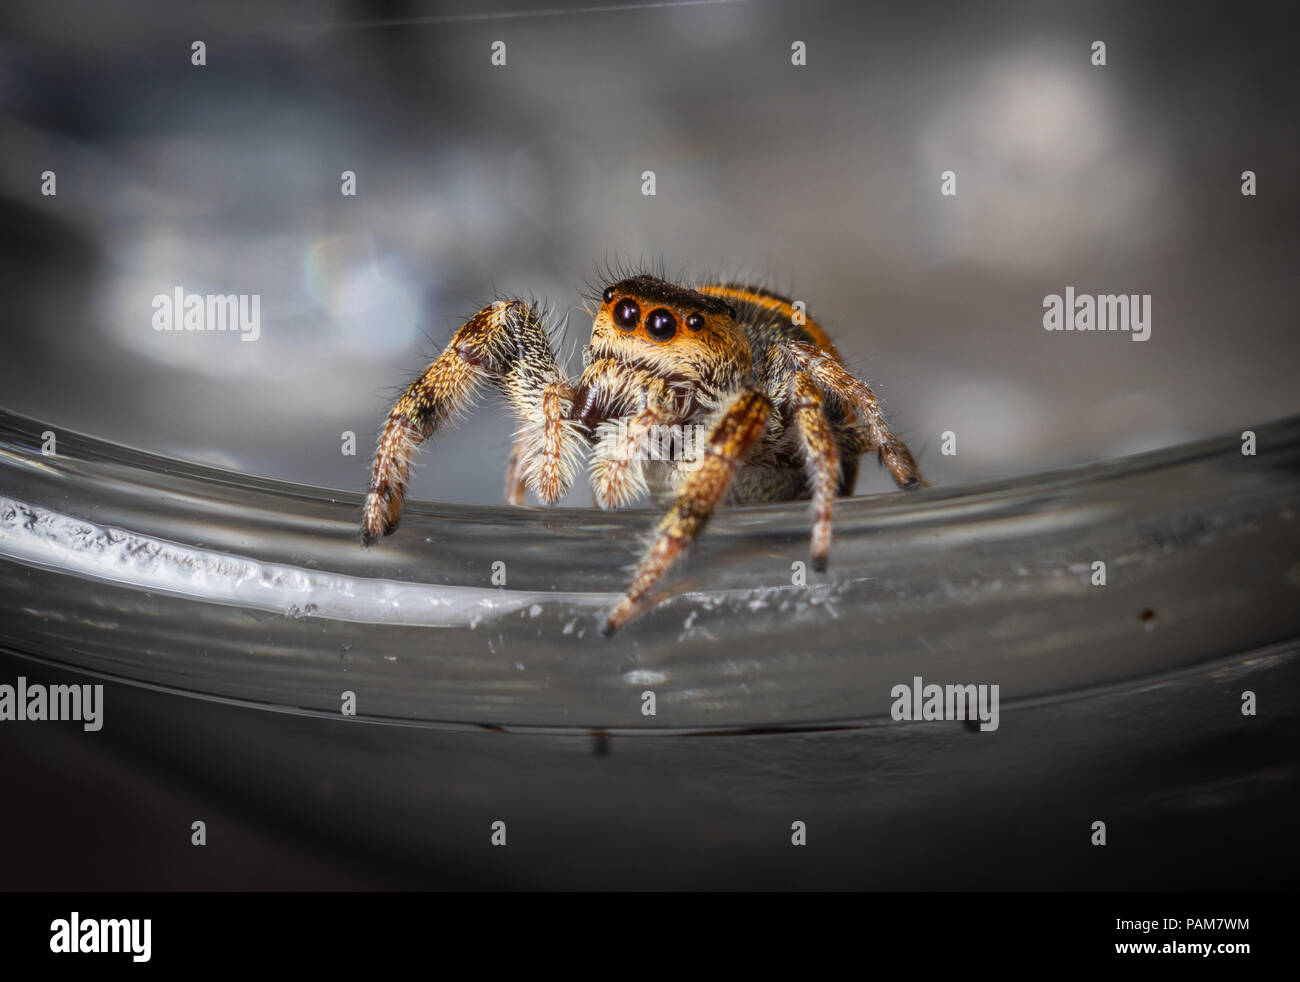 A jumping spider walks along the rim of a glass. Stock Photo